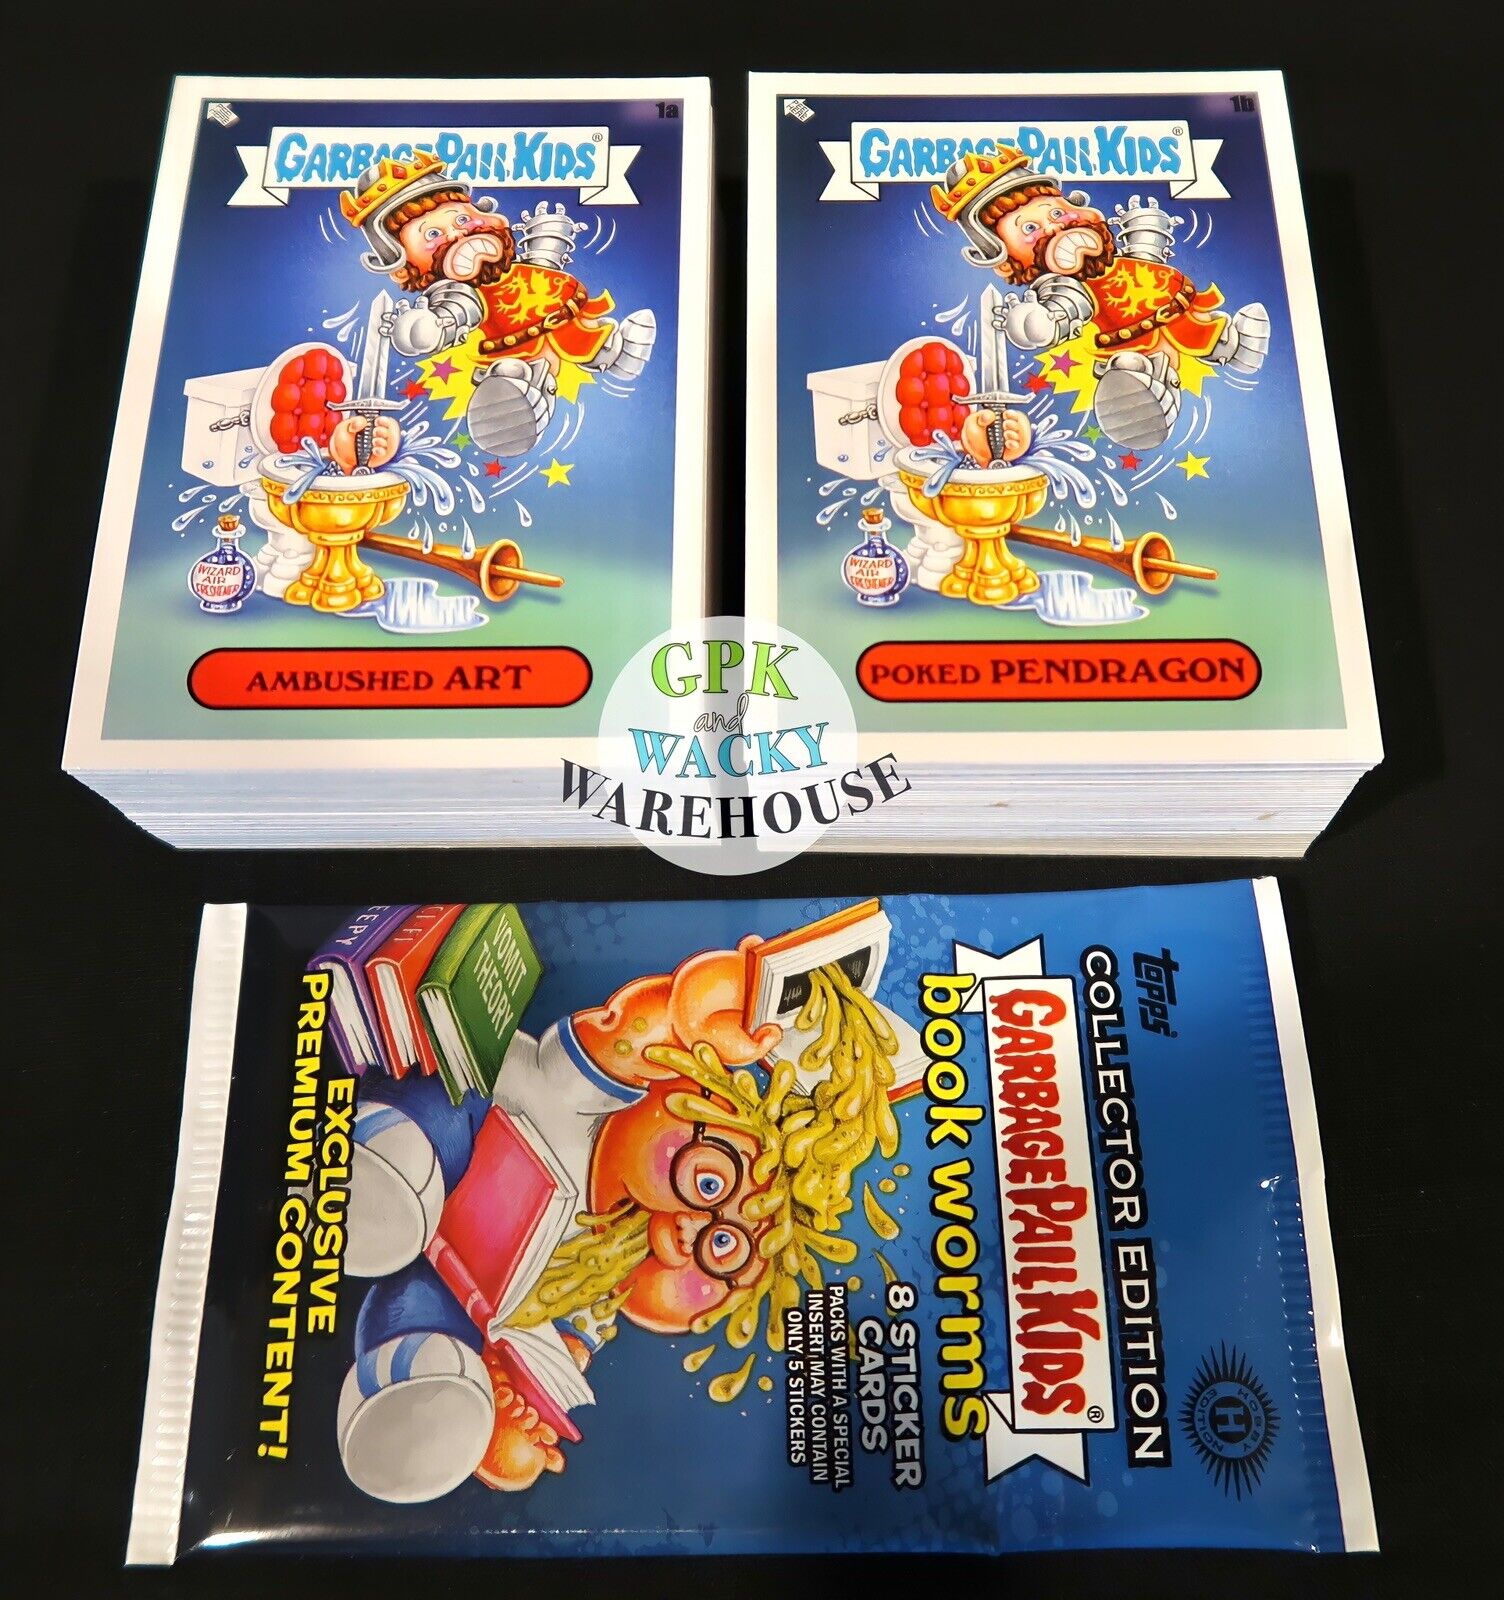 2022 SERIES 1 GARBAGE PAIL KIDS BOOKWORMS 200 CARD COMPLETE BASE SET + WRAPPER